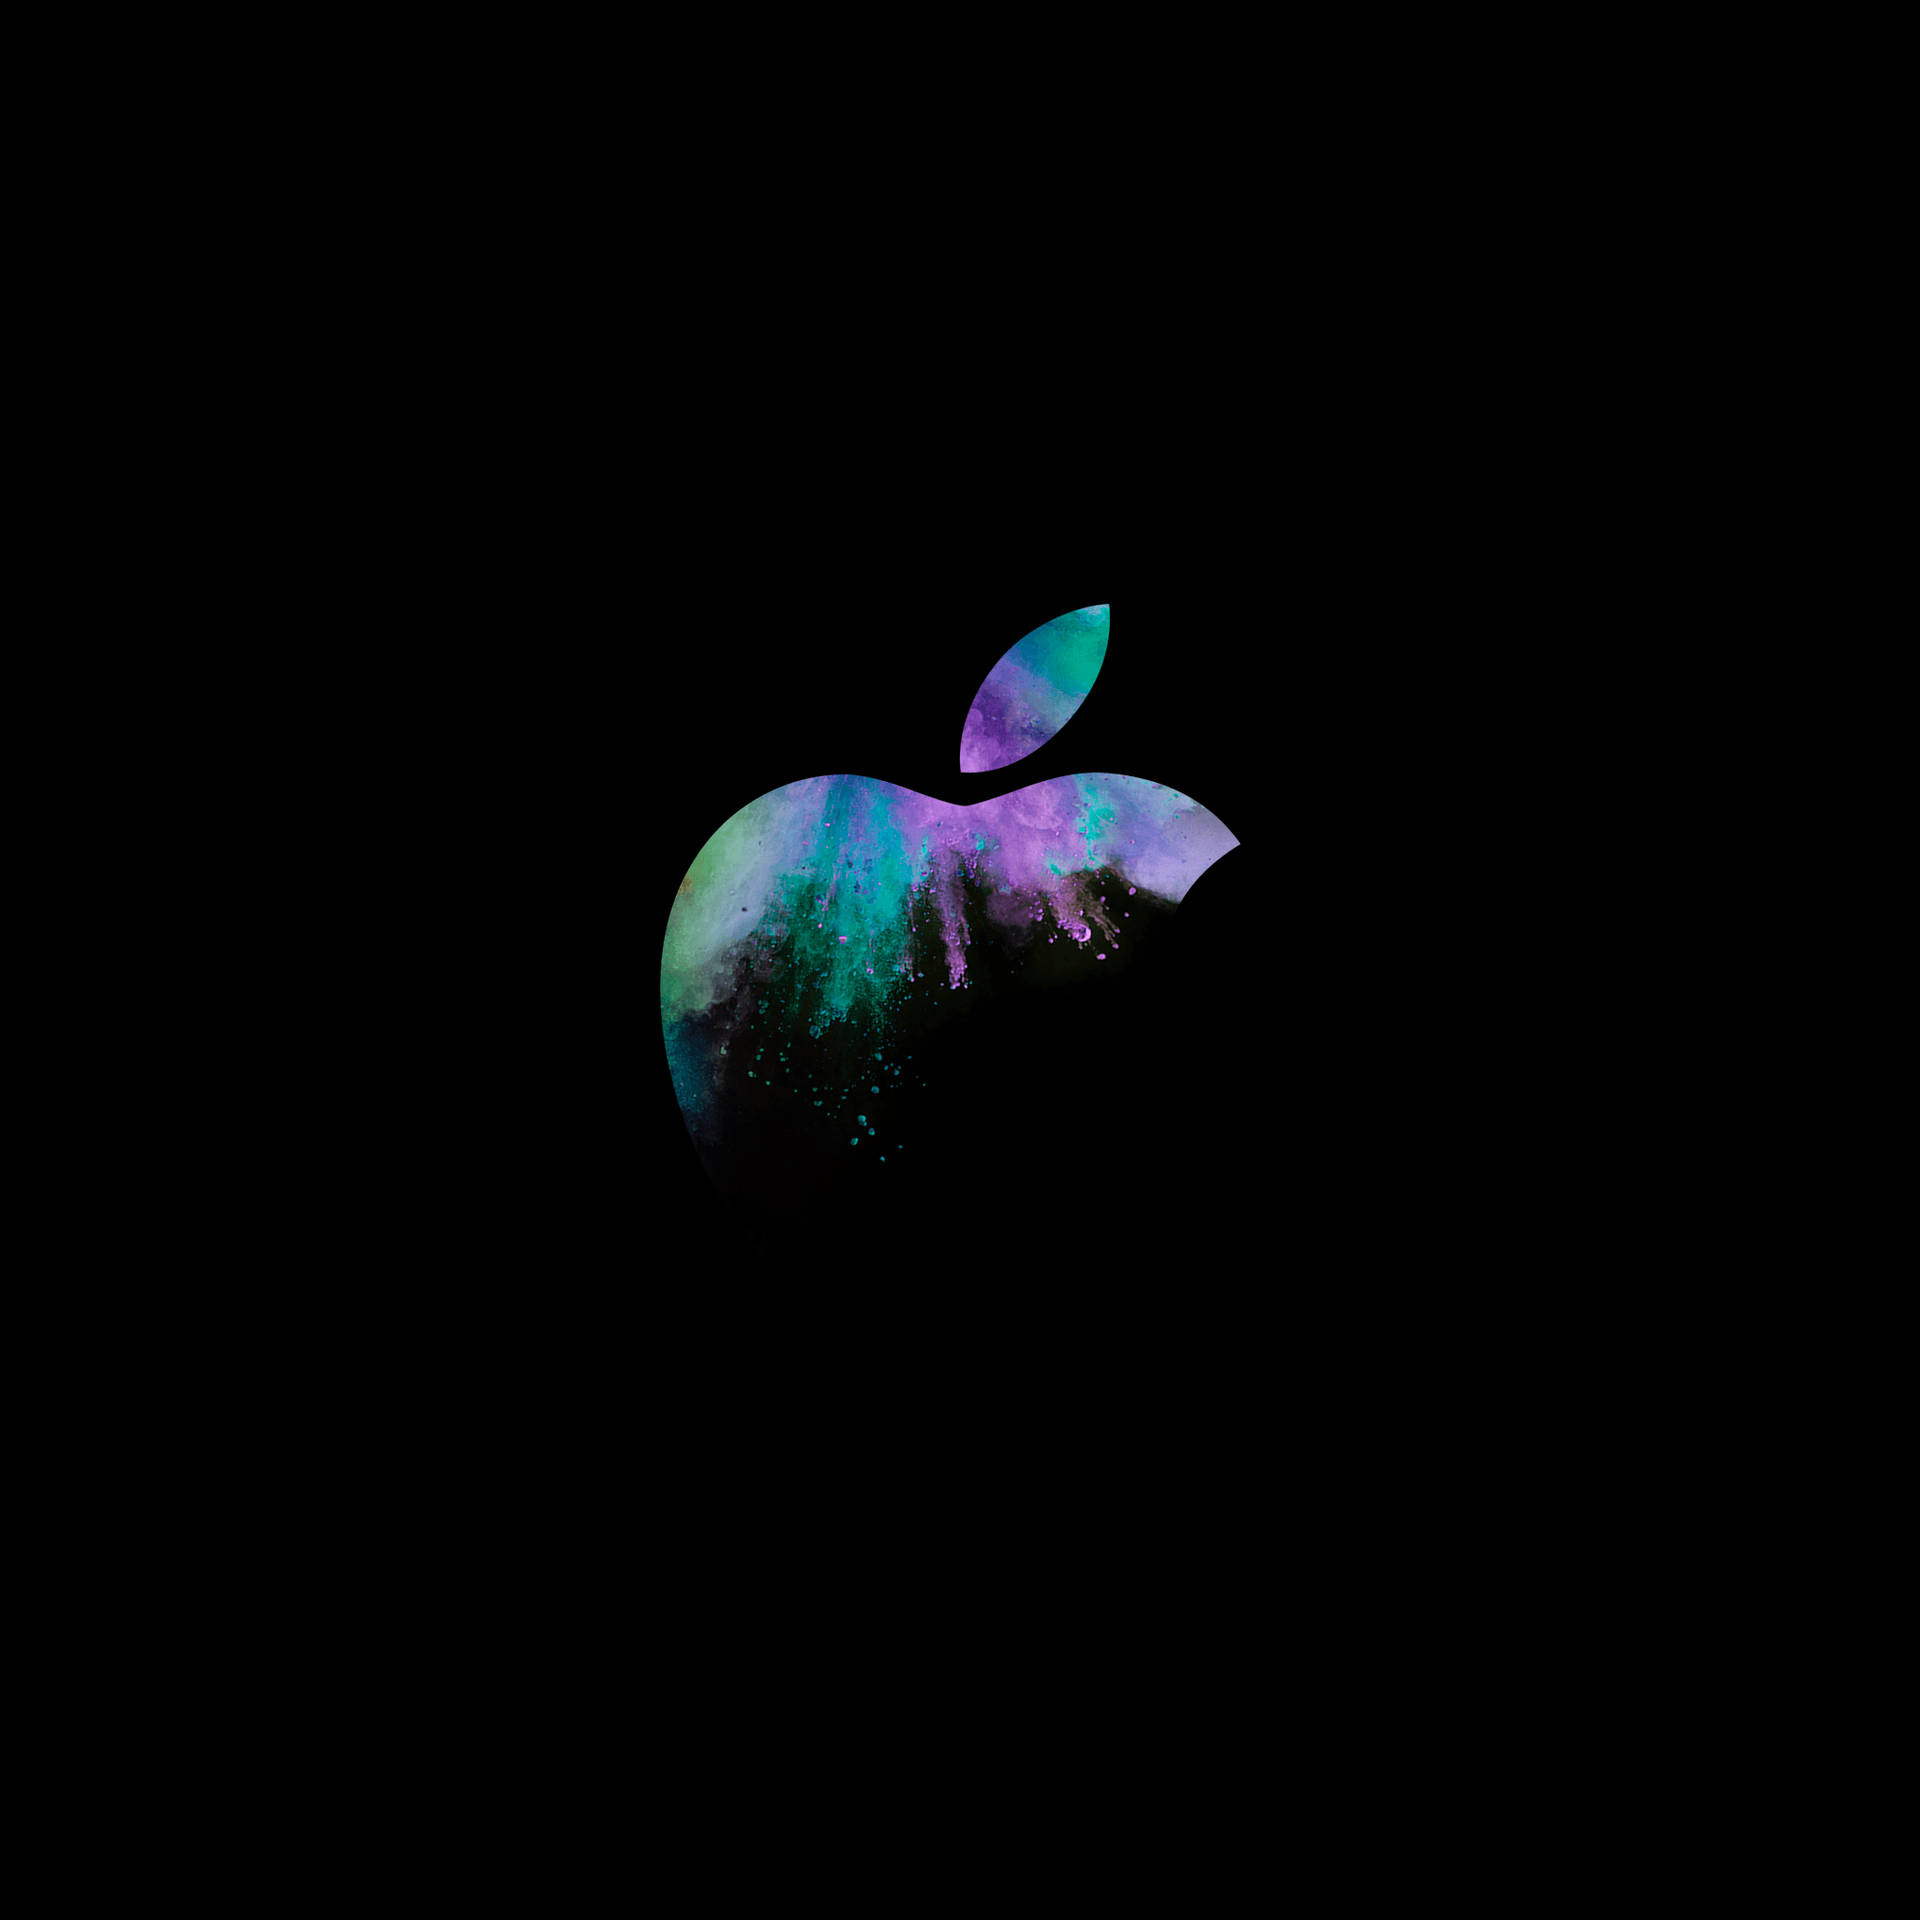 A Colorful Apple Logo for a New Generation Wallpaper